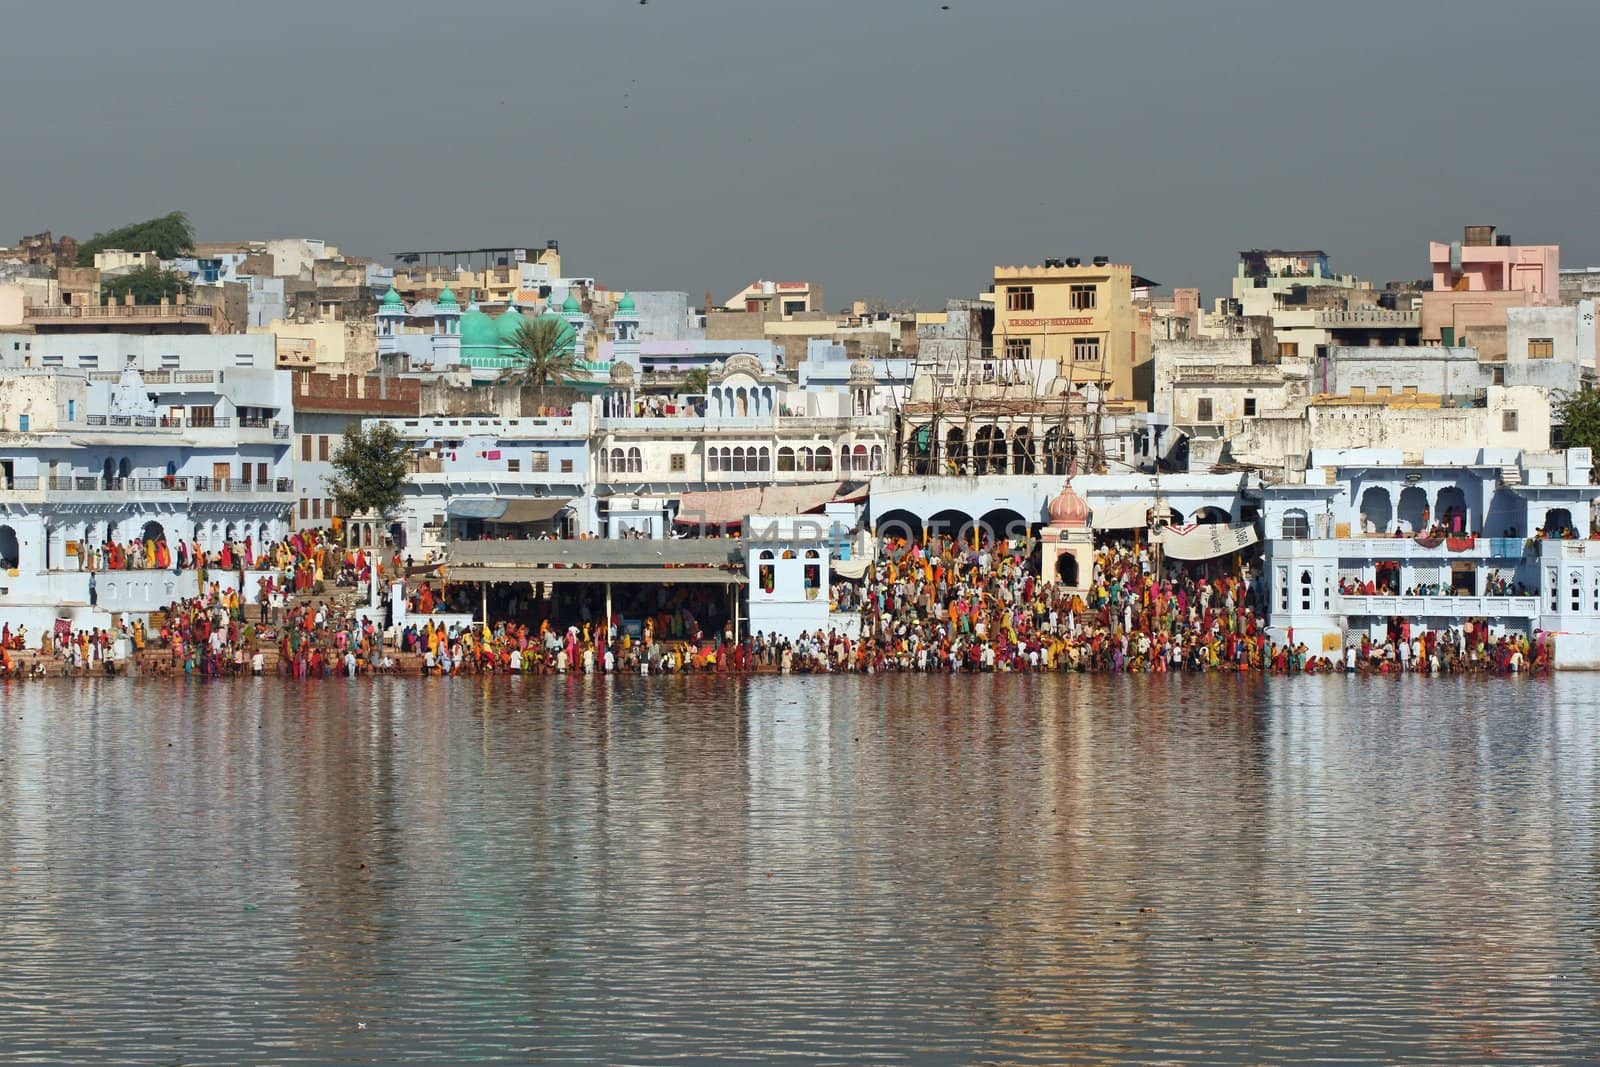 Crowds of people around a sacred lake during the Pushkar Fair, Rajasthan, India